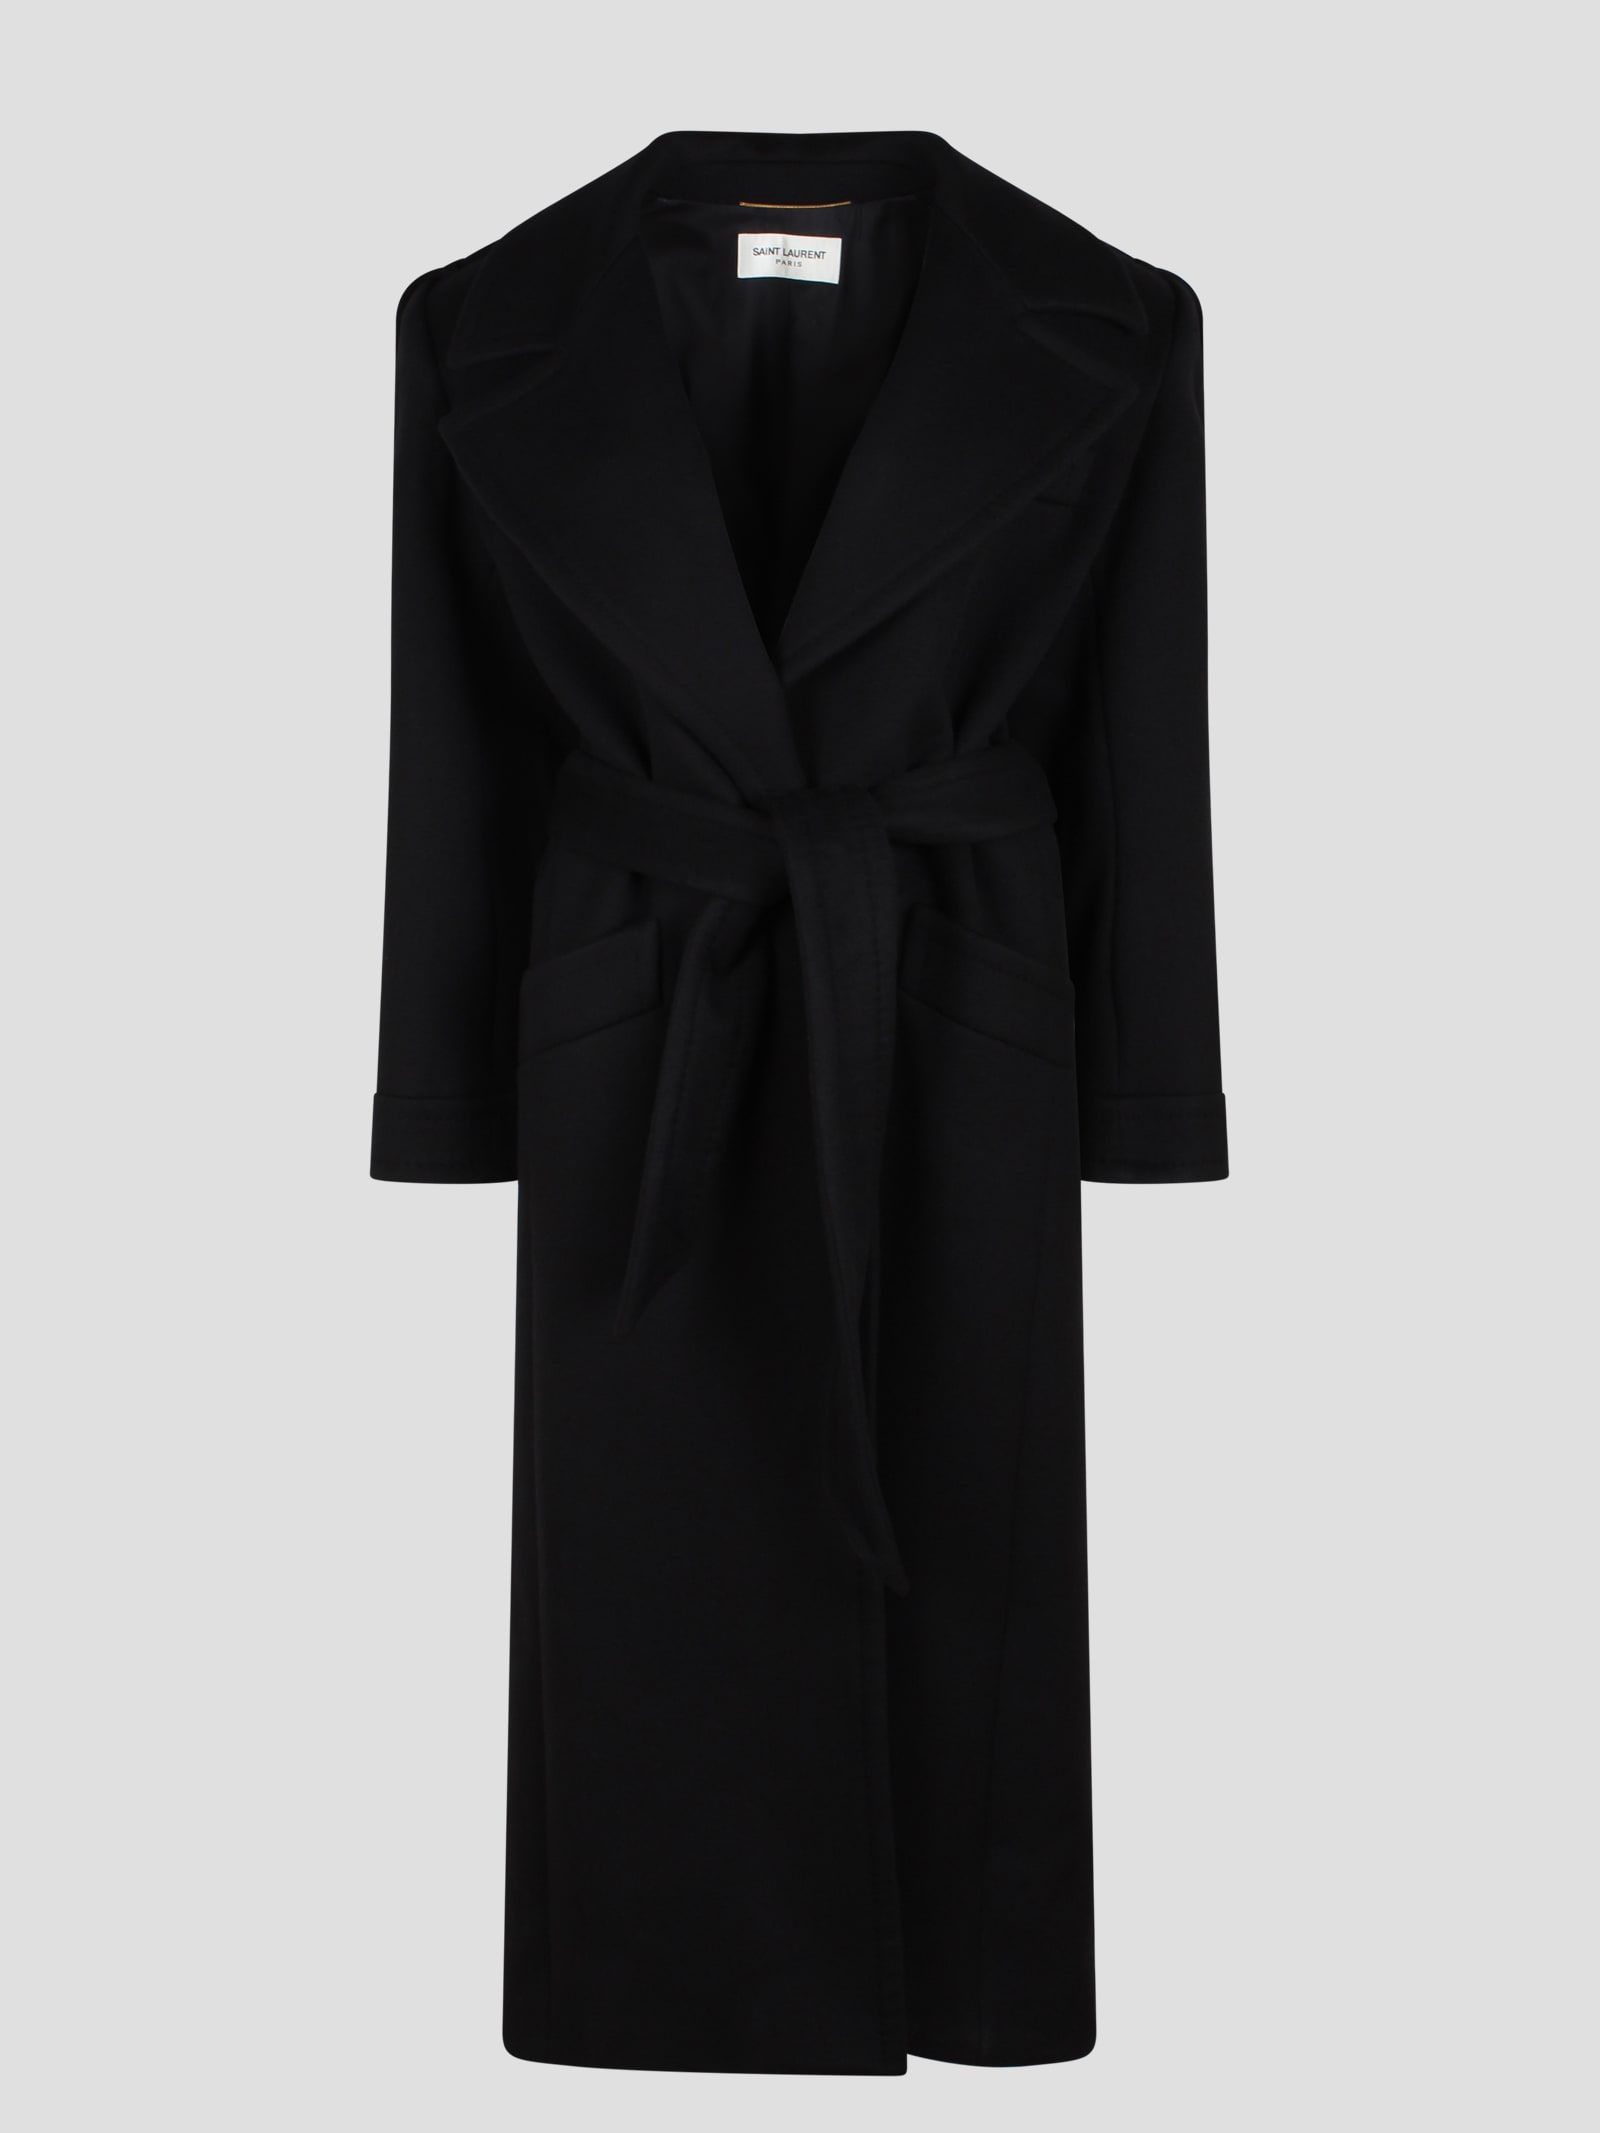 Saint Laurent Cashmere And Wool Belted Coat